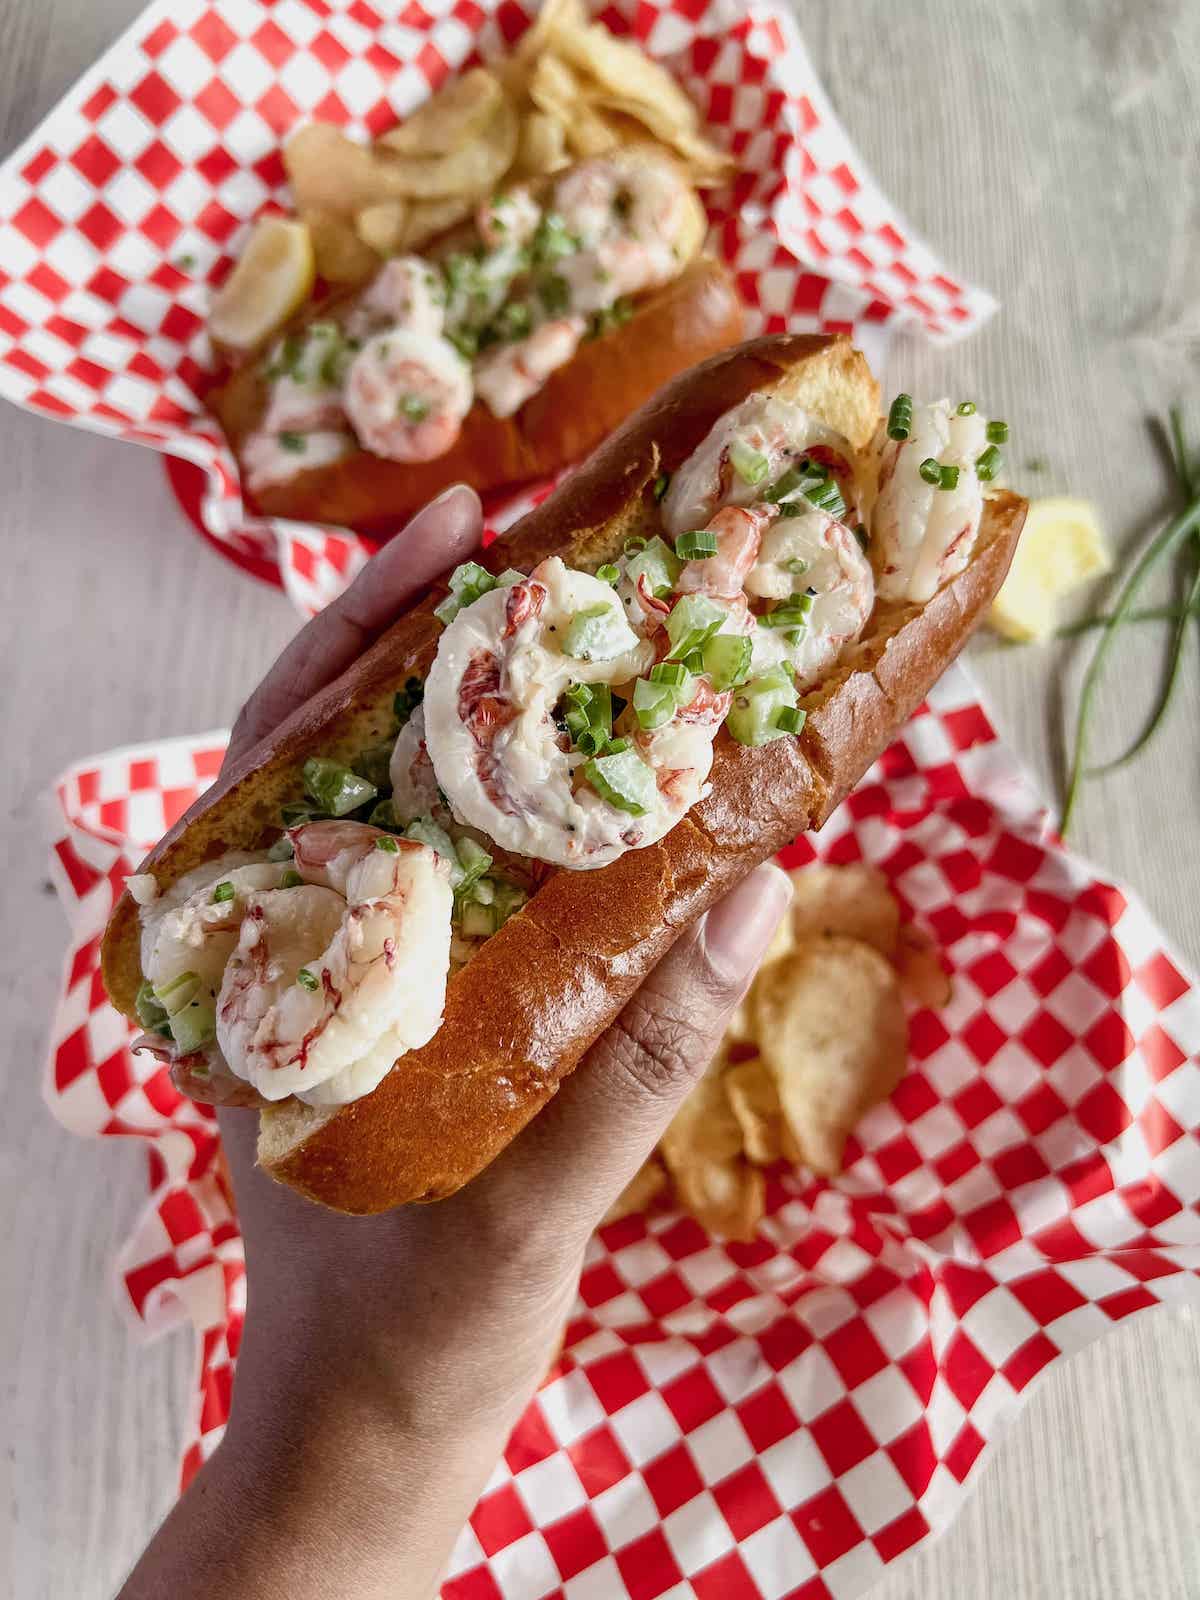 Brown hand holding up argentine red shrimp roll with deli baskets lined with red and white checkered paper below.